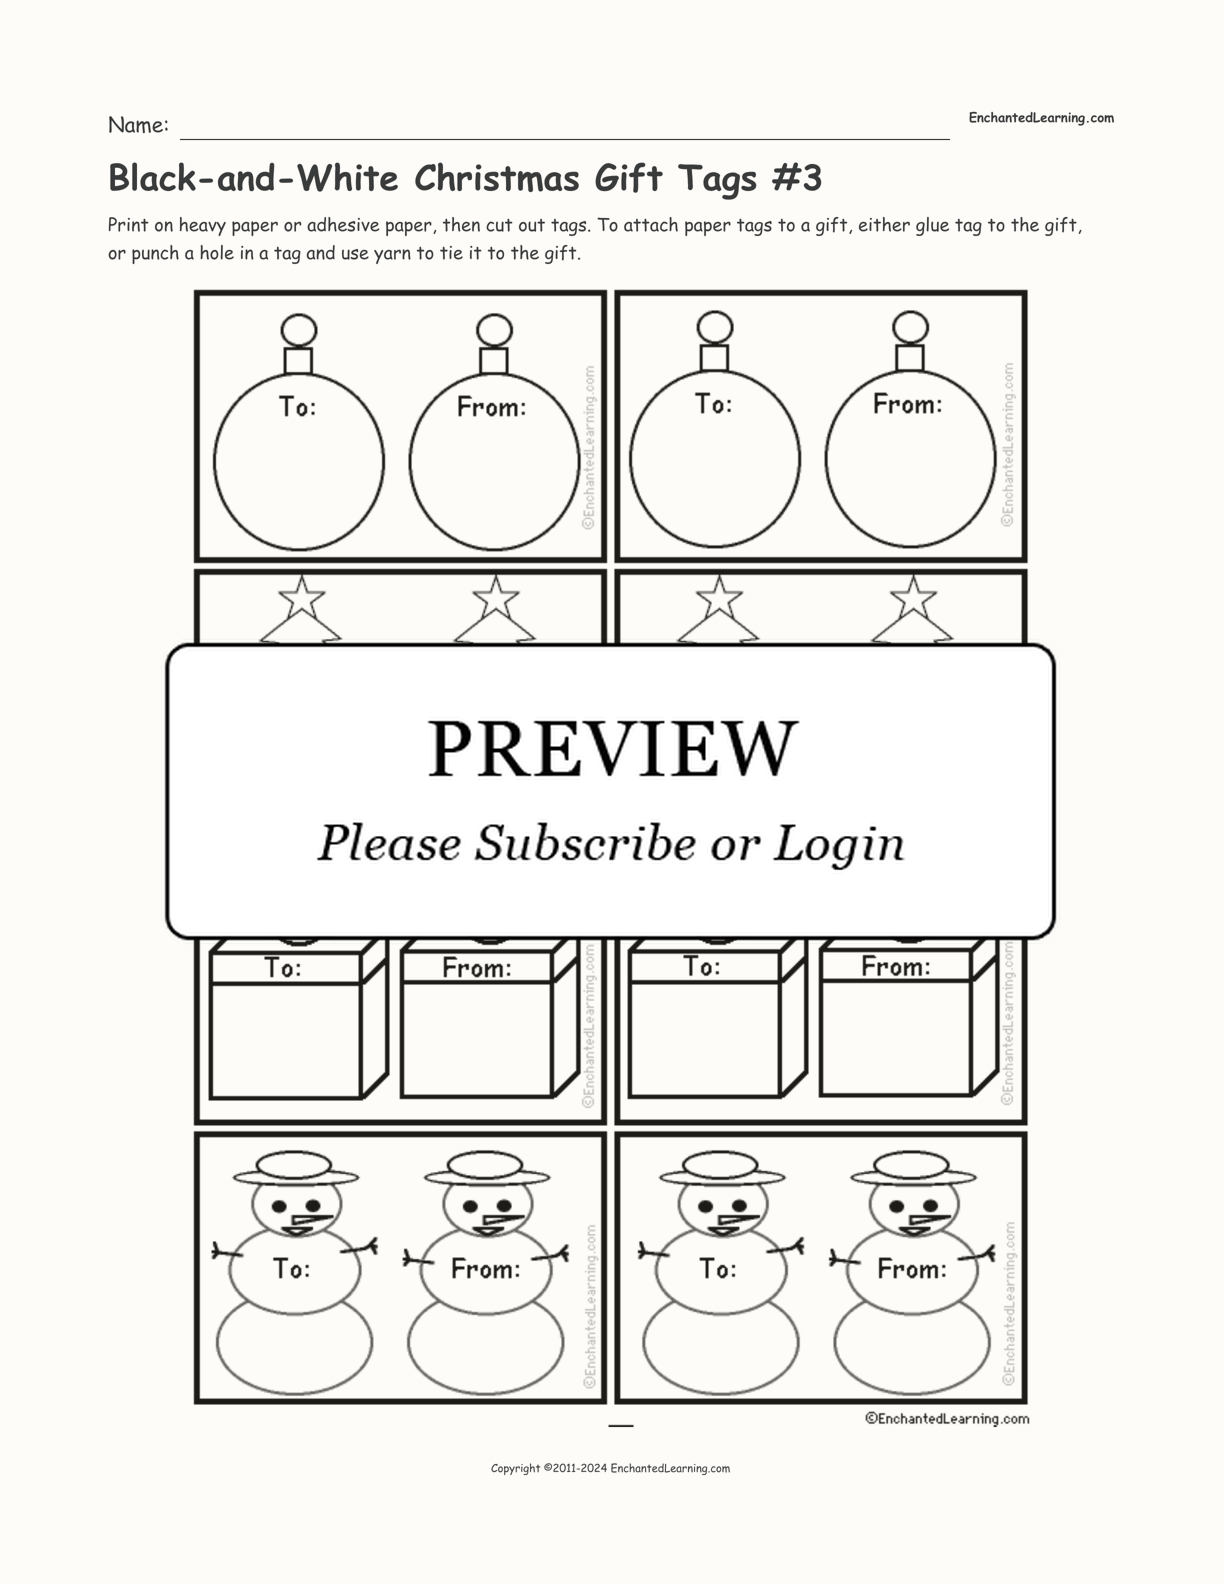 Black-and-White Christmas Gift Tags #3 interactive printout page 1